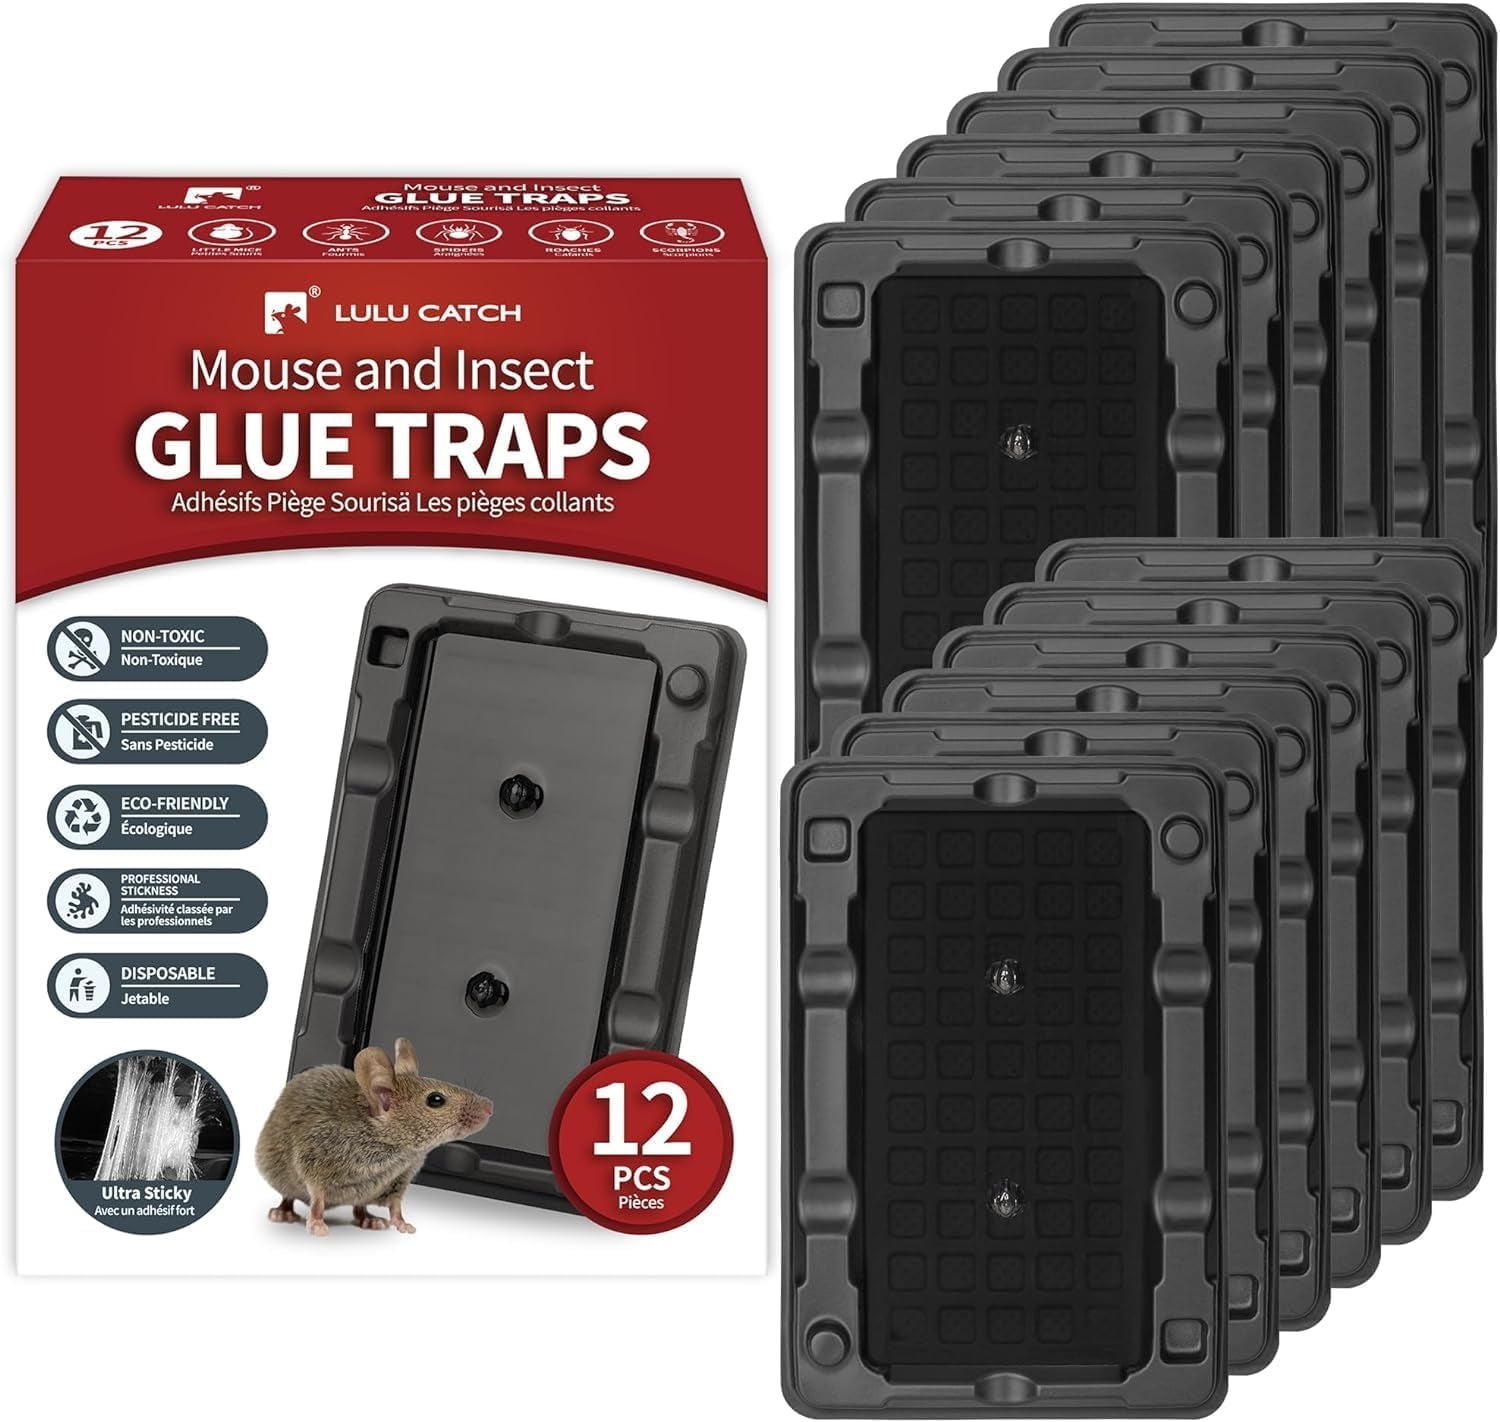 Why choose humane mouse traps for pest control?